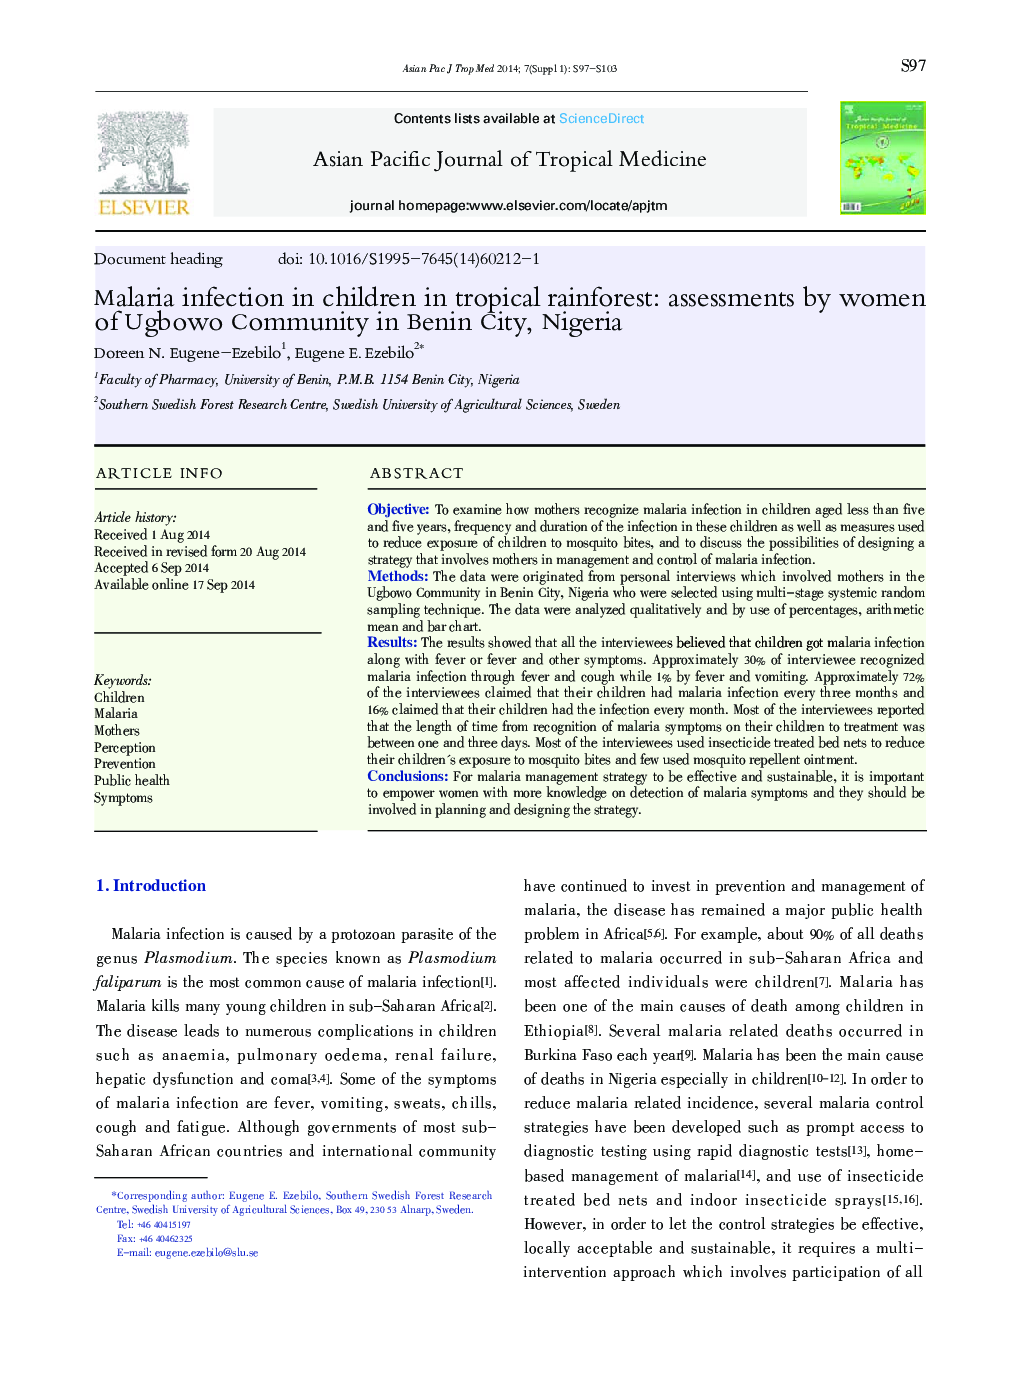 Malaria infection in children in tropical rainforest: assessments by women of Ugbowo Community in Benin City, Nigeria 